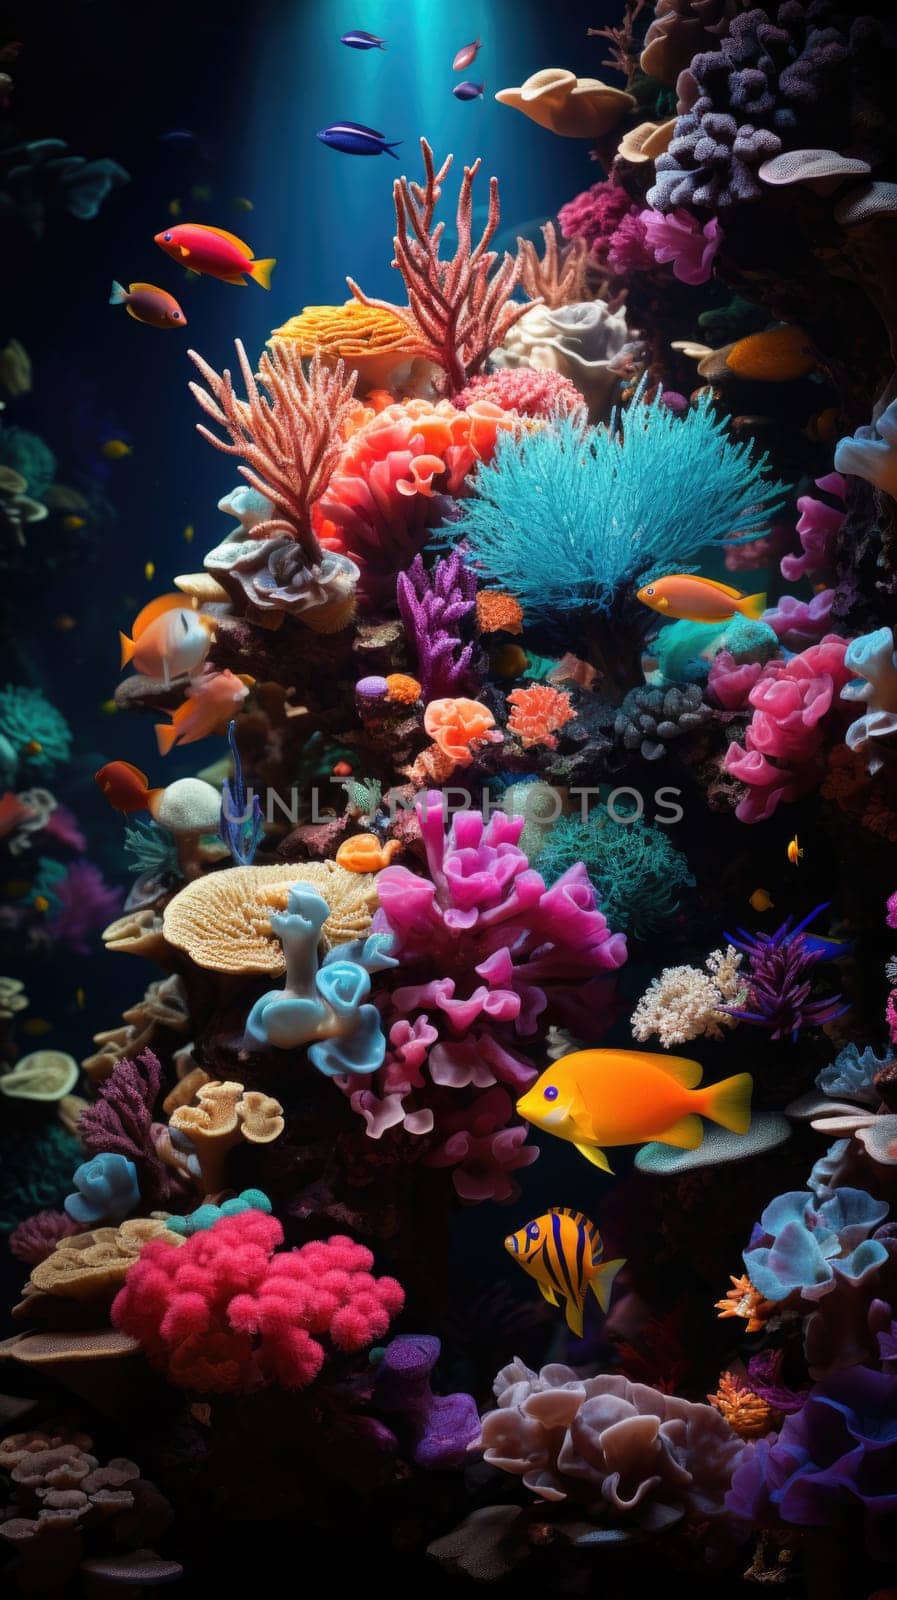 A vibrant scene in a large aquarium filled with colorful fish swimming amidst a vibrant coral reef.